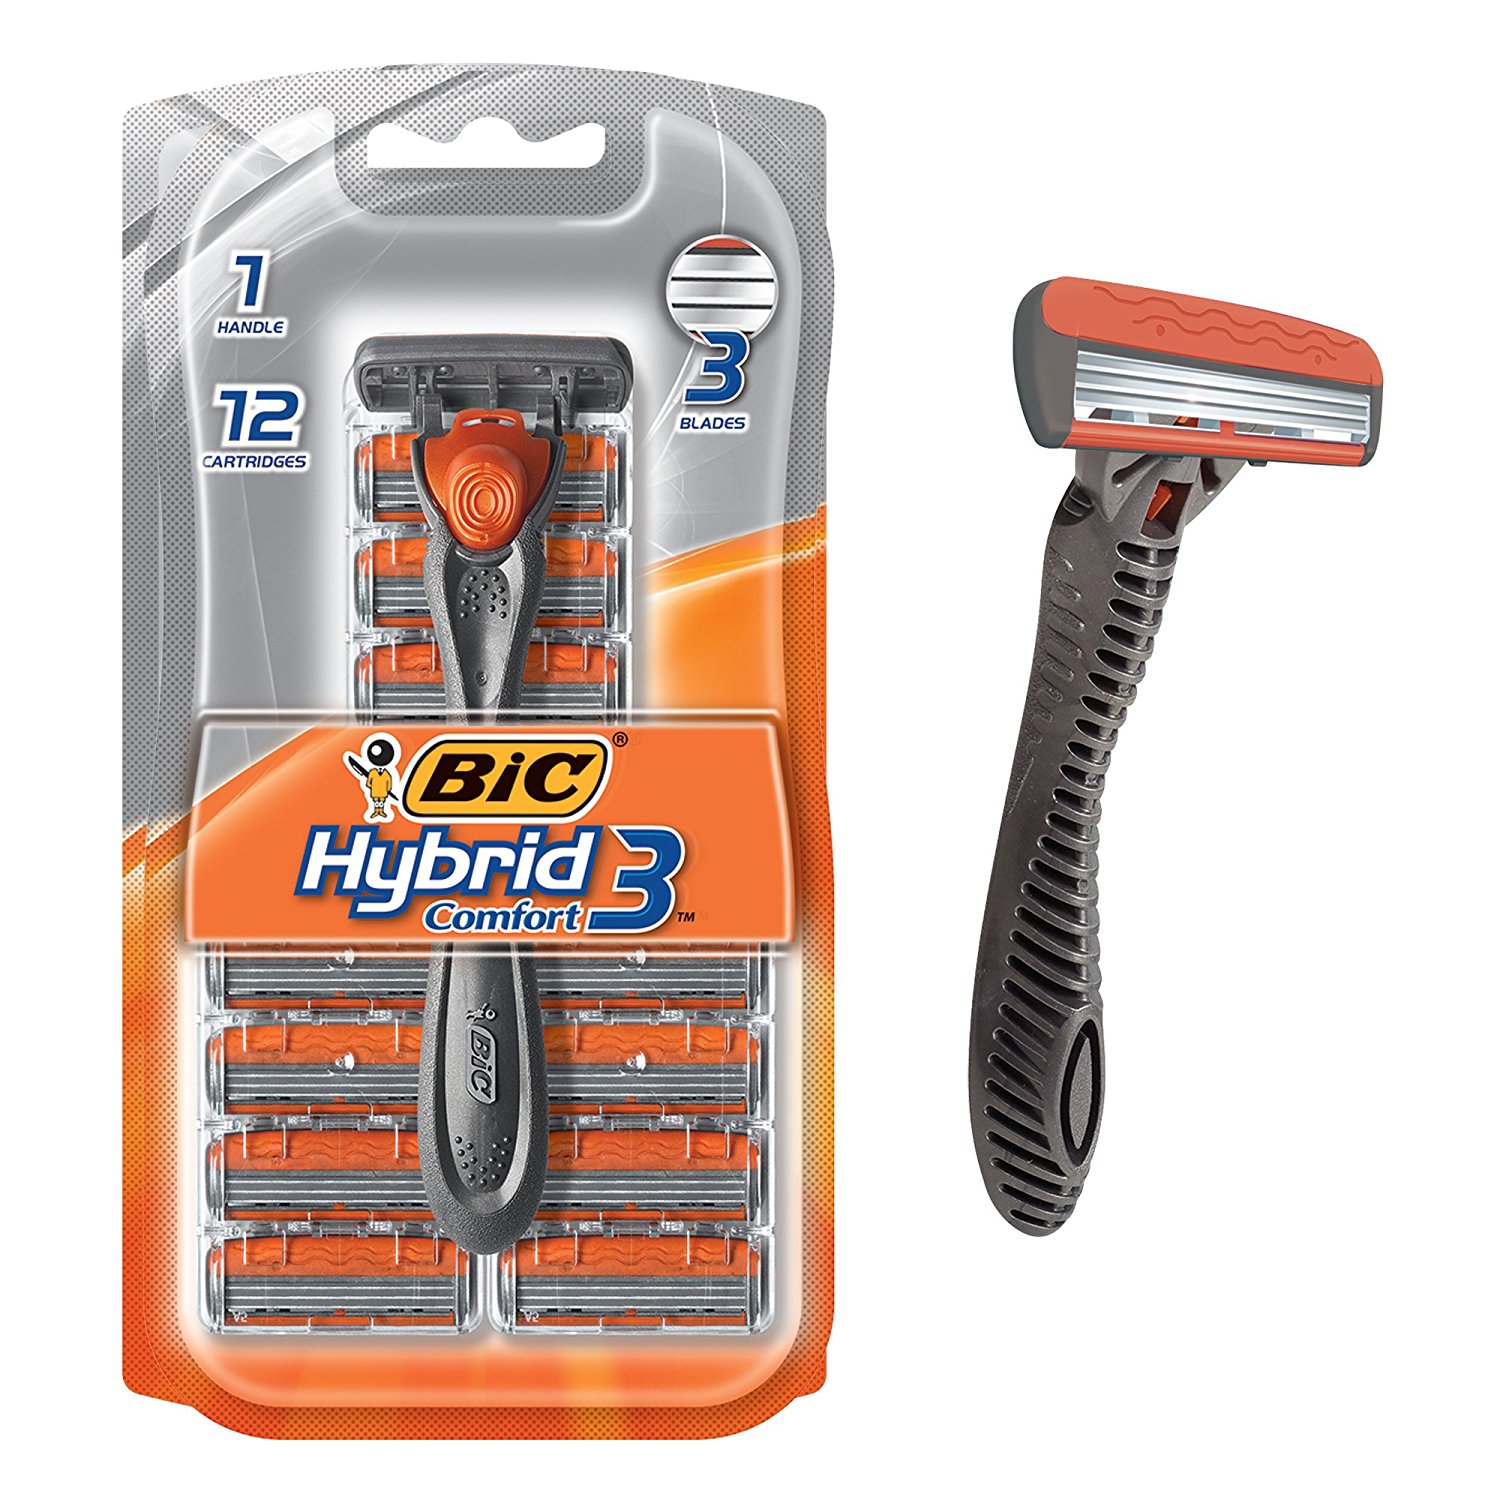 BIC Hybrid 3 Comfort Disposable Razor 12 Count Only $5.15 Shipped!